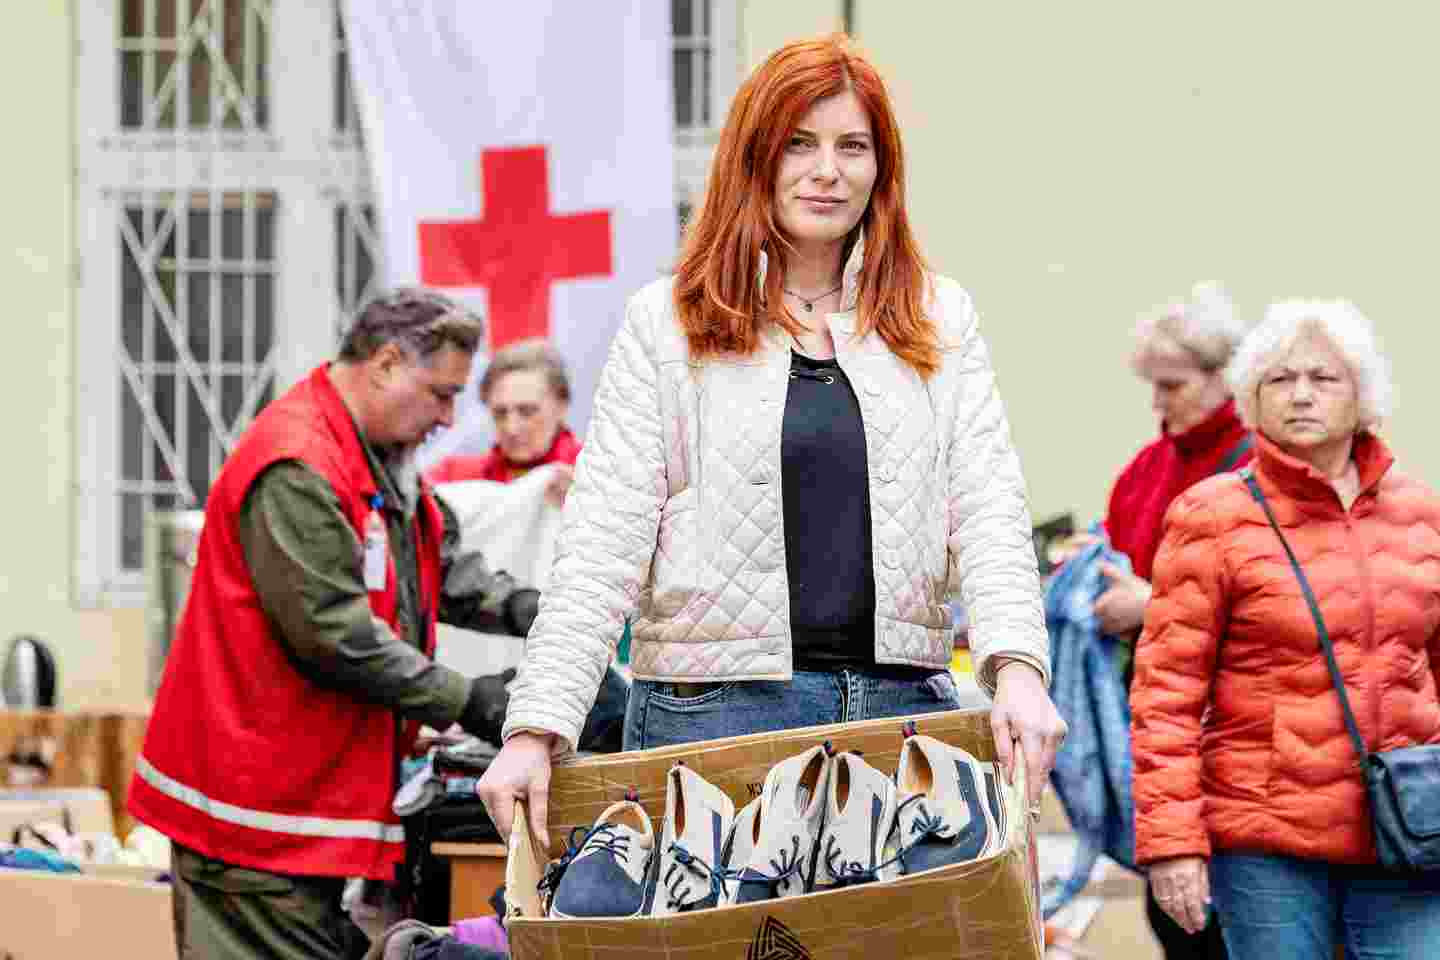 A woman holding a shoe box with people in the background.